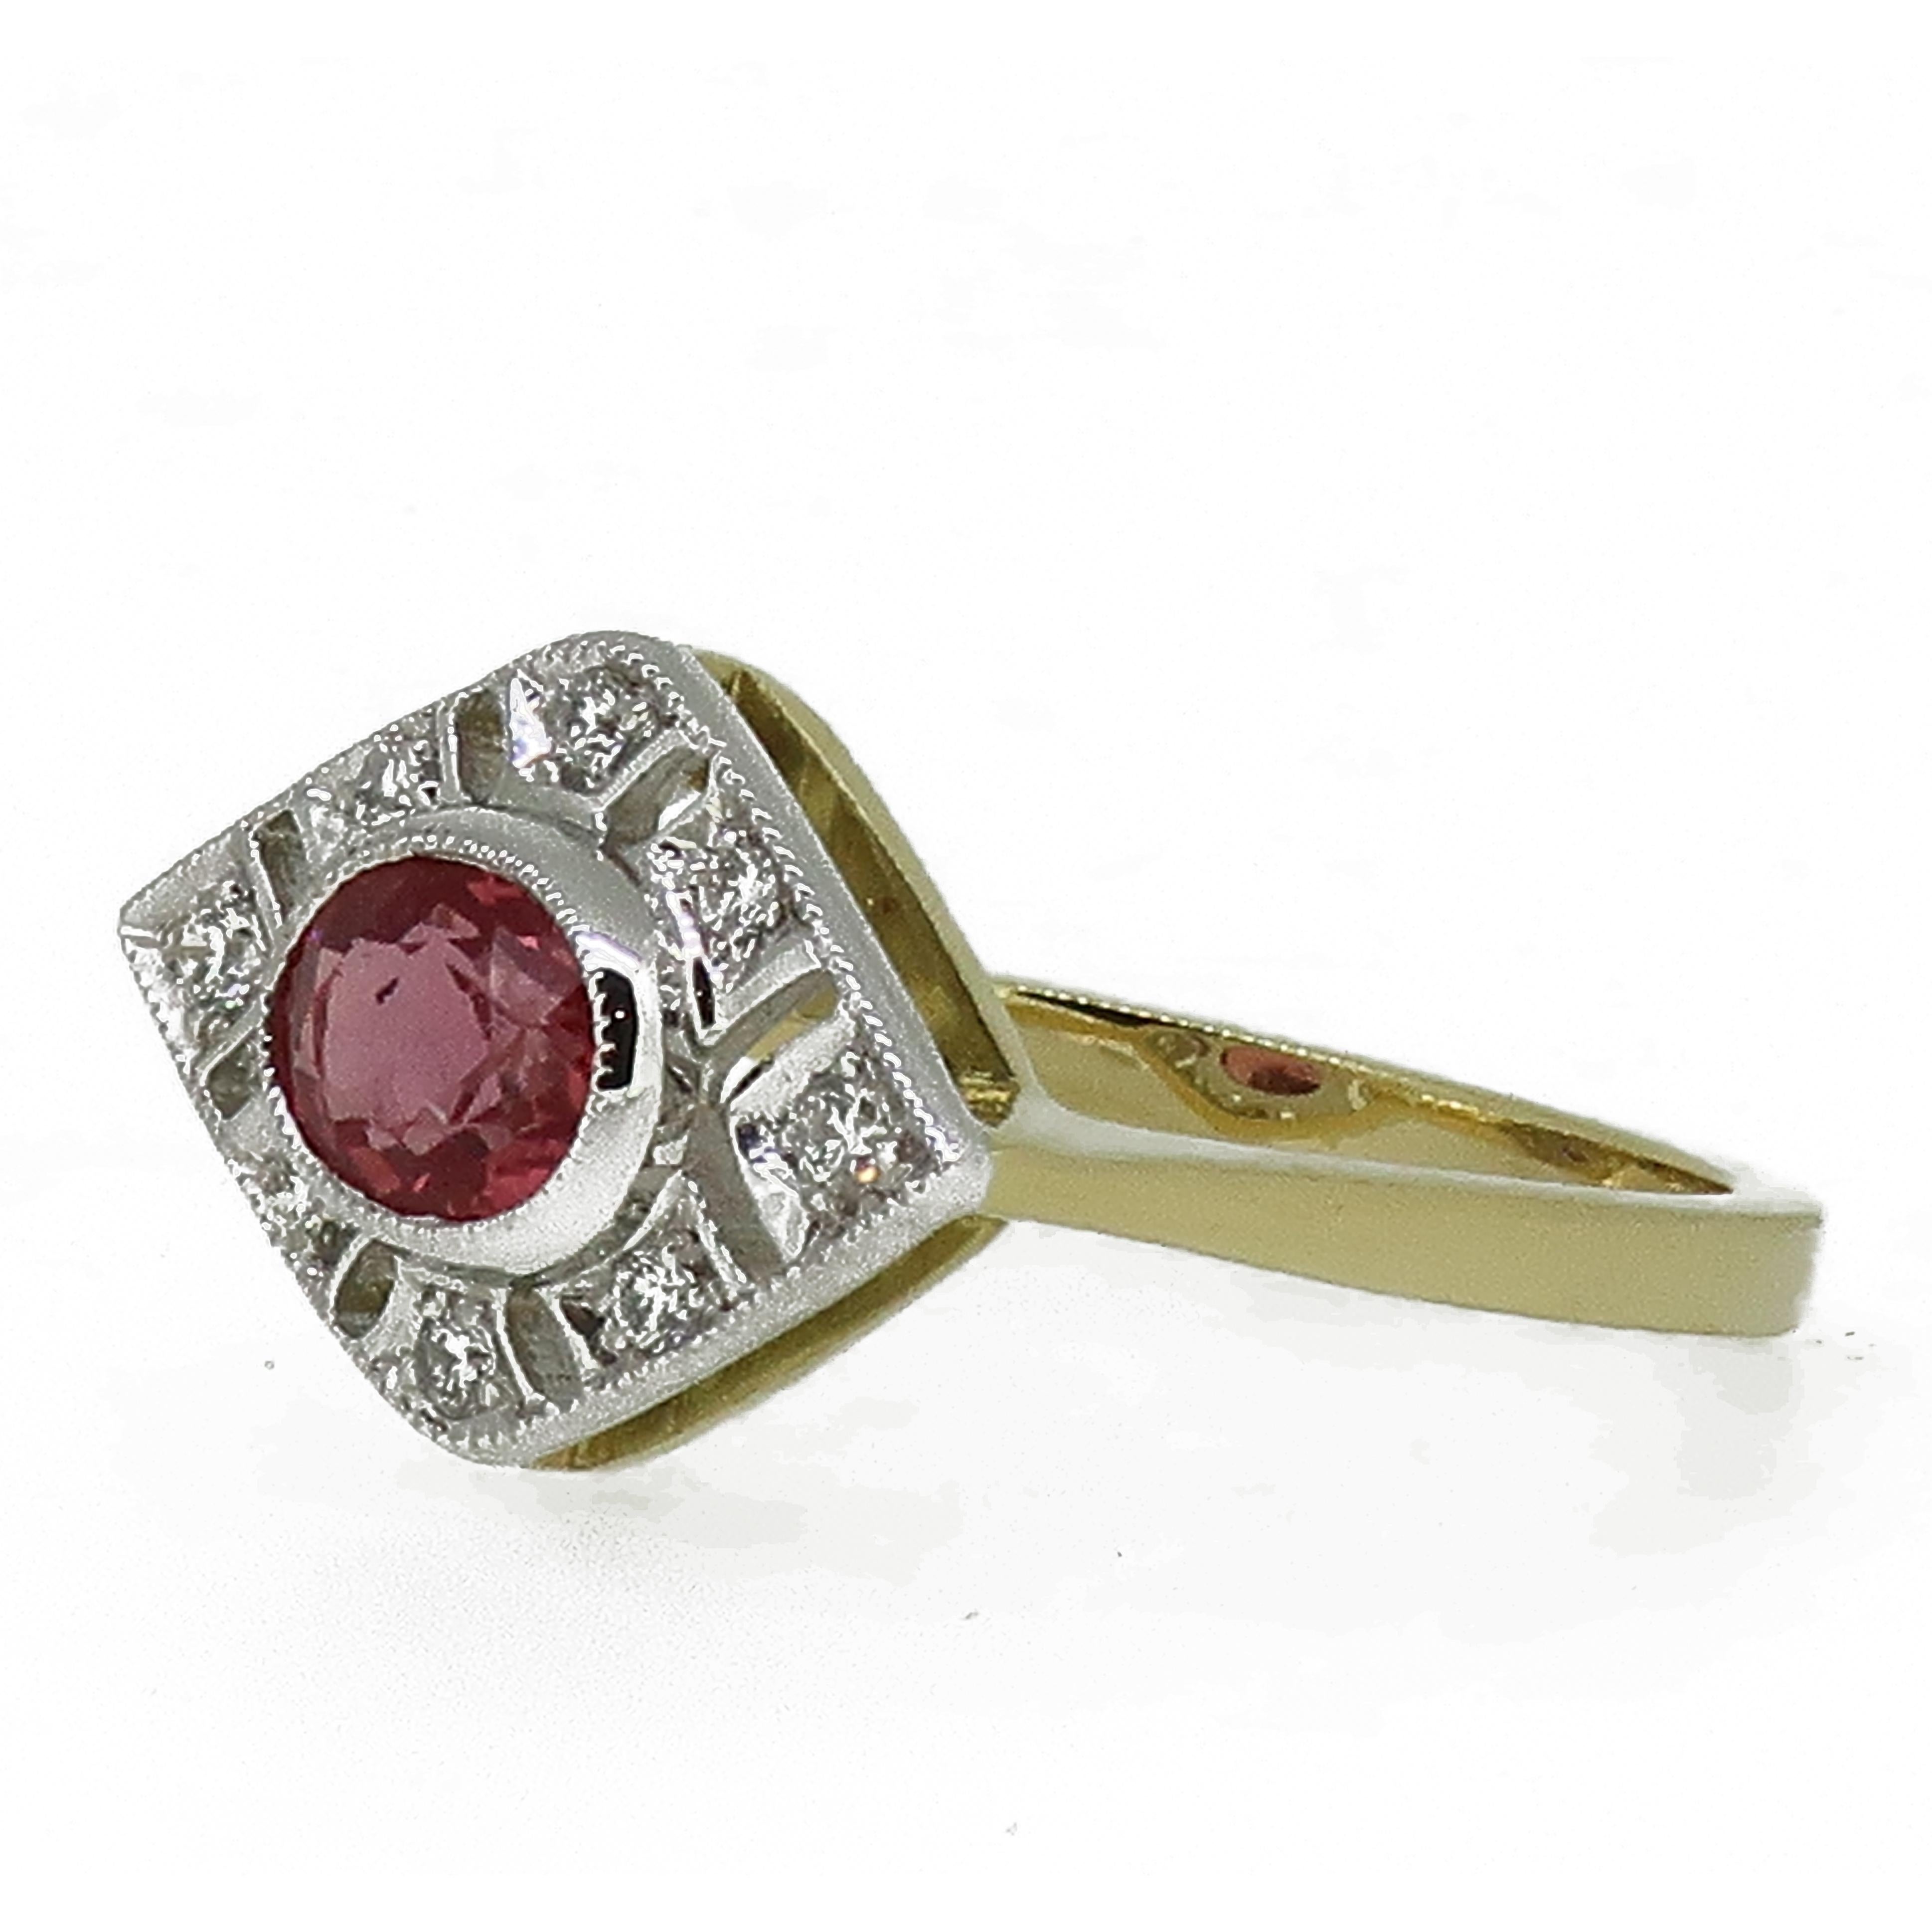 18 Karat Gold Oval Cut Pink Sapphire & Diamond Art Deco Style Cluster Ring.

A delicate and dainty oval cut pink orange sapphire set in a fine white gold bezel weighing 1.14ct, surrounded by a open frame work of white brilliant cut diamonds all set